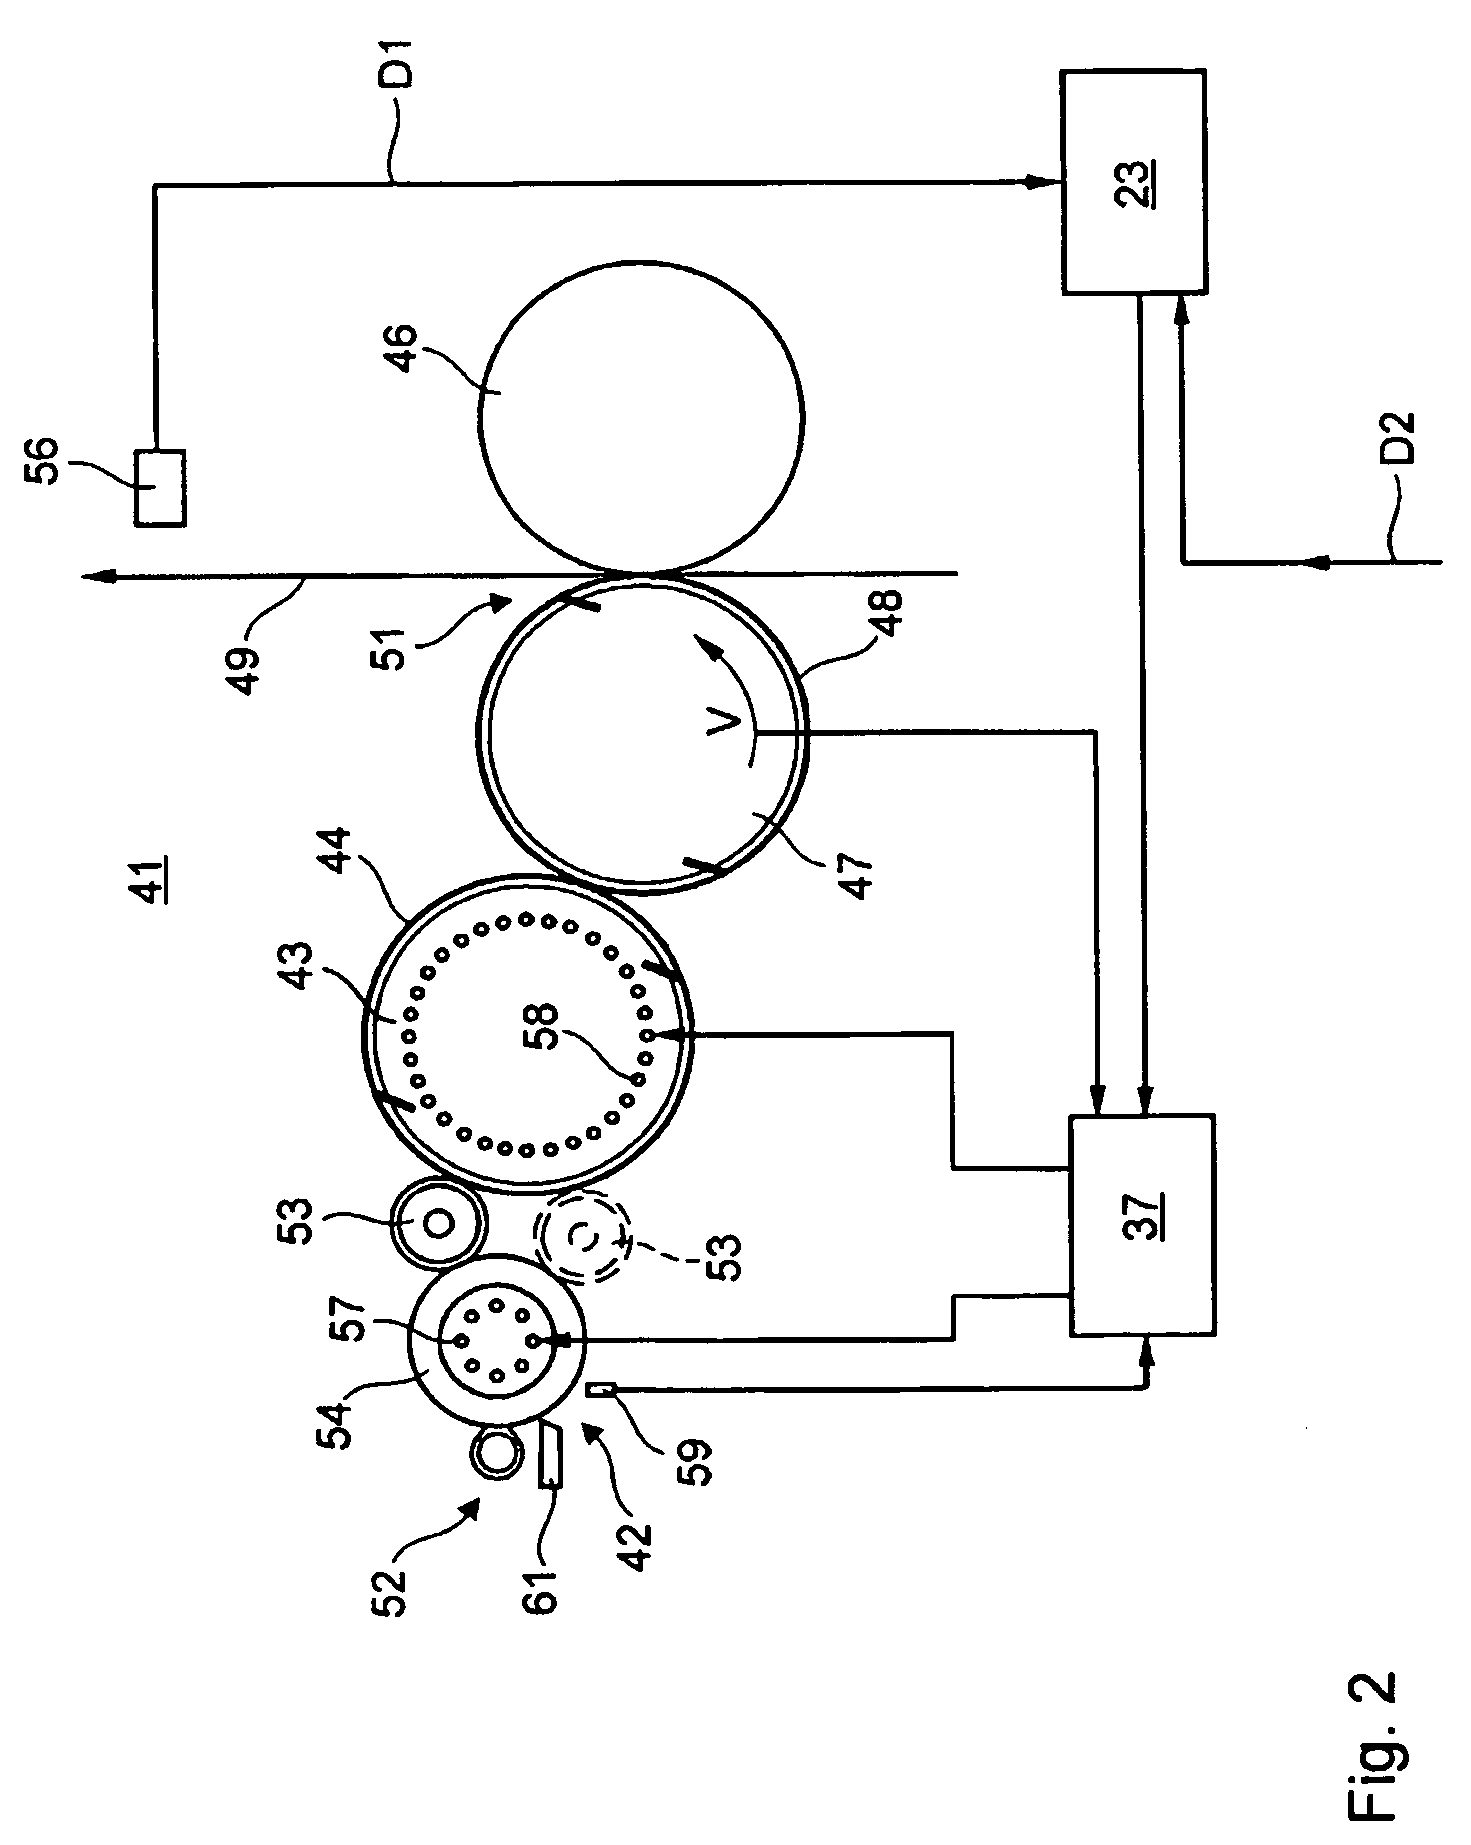 Method and device for adjustment of the transfer of printing ink and a method for the application of the device